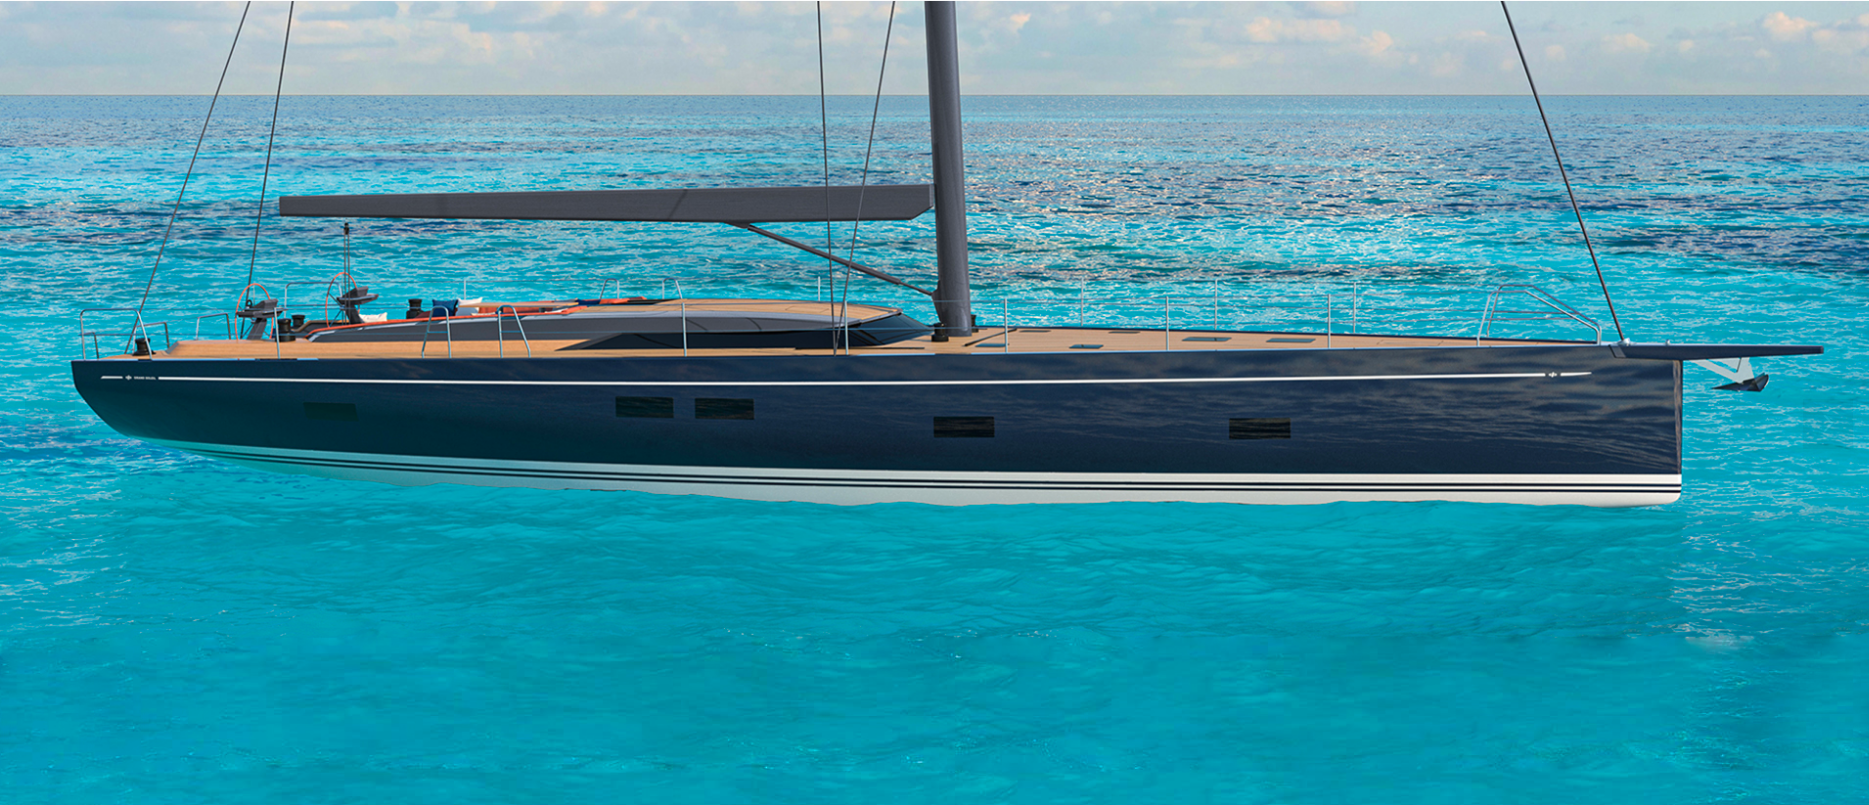 The new Grand Soleil 72 Long Cruise version